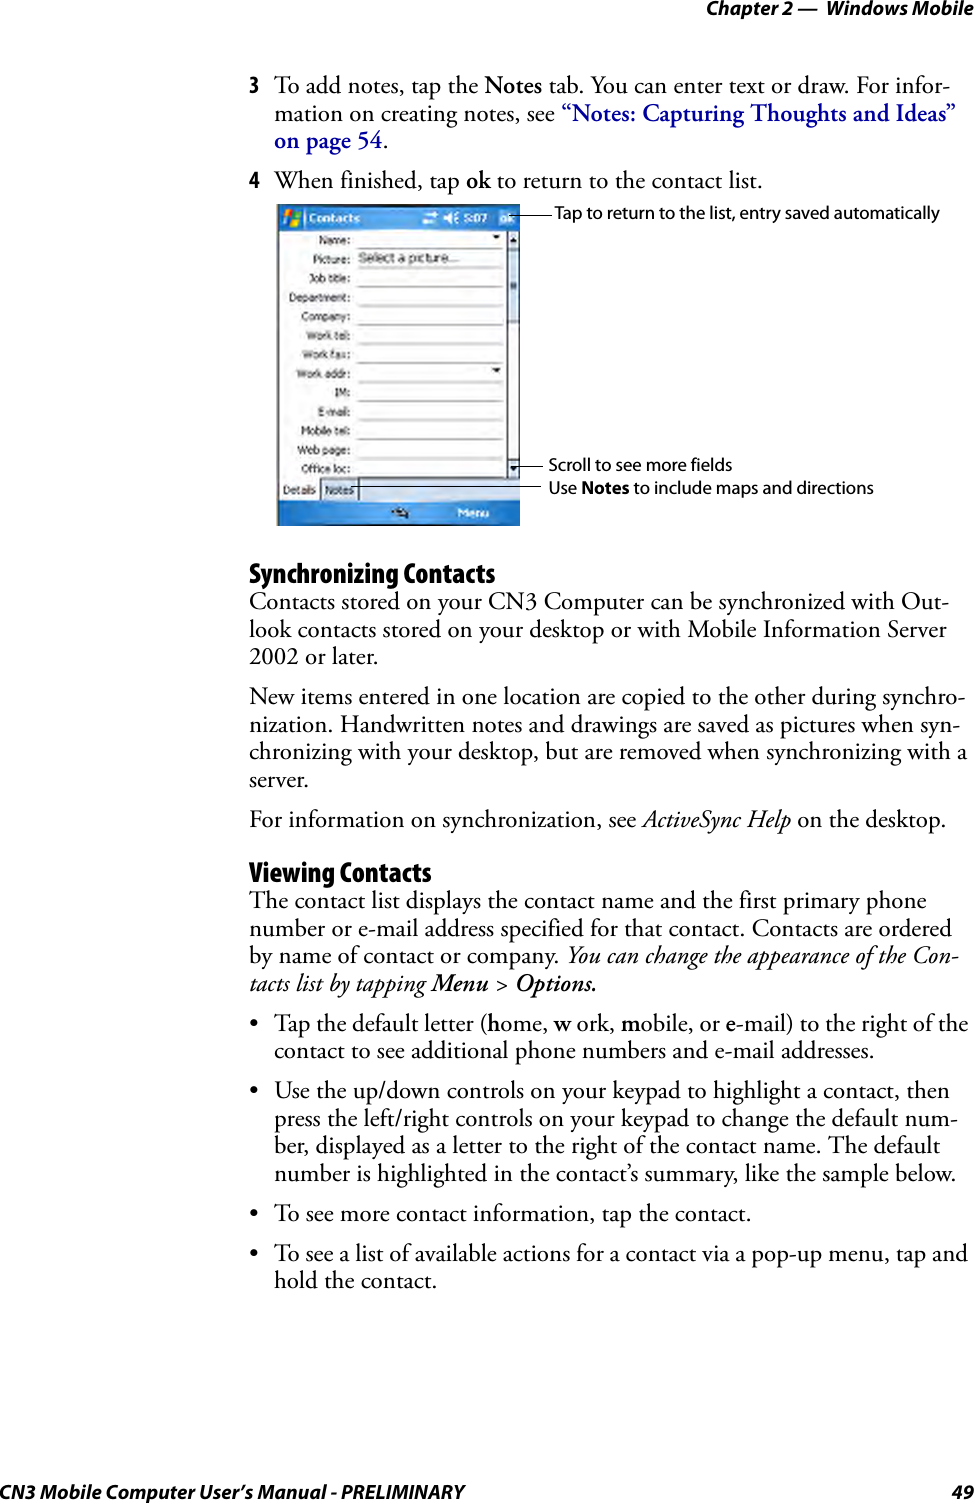 Chapter 2 —  Windows MobileCN3 Mobile Computer User’s Manual - PRELIMINARY 493To add notes, tap the Notes tab. You can enter text or draw. For infor-mation on creating notes, see “Notes: Capturing Thoughts and Ideas” on page 54.4When finished, tap ok to return to the contact list.Synchronizing ContactsContacts stored on your CN3 Computer can be synchronized with Out-look contacts stored on your desktop or with Mobile Information Server 2002 or later.New items entered in one location are copied to the other during synchro-nization. Handwritten notes and drawings are saved as pictures when syn-chronizing with your desktop, but are removed when synchronizing with a server.For information on synchronization, see ActiveSync Help on the desktop.Viewing ContactsThe contact list displays the contact name and the first primary phone number or e-mail address specified for that contact. Contacts are ordered by name of contact or company. You can change the appearance of the Con-tacts list by tapping Menu &gt; Options.• Tap the default letter (home, w ork, mobile, or e-mail) to the right of the contact to see additional phone numbers and e-mail addresses.• Use the up/down controls on your keypad to highlight a contact, then press the left/right controls on your keypad to change the default num-ber, displayed as a letter to the right of the contact name. The default number is highlighted in the contact’s summary, like the sample below.• To see more contact information, tap the contact.• To see a list of available actions for a contact via a pop-up menu, tap and hold the contact.Tap to return to the list, entry saved automaticallyScroll to see more fieldsUse Notes to include maps and directions